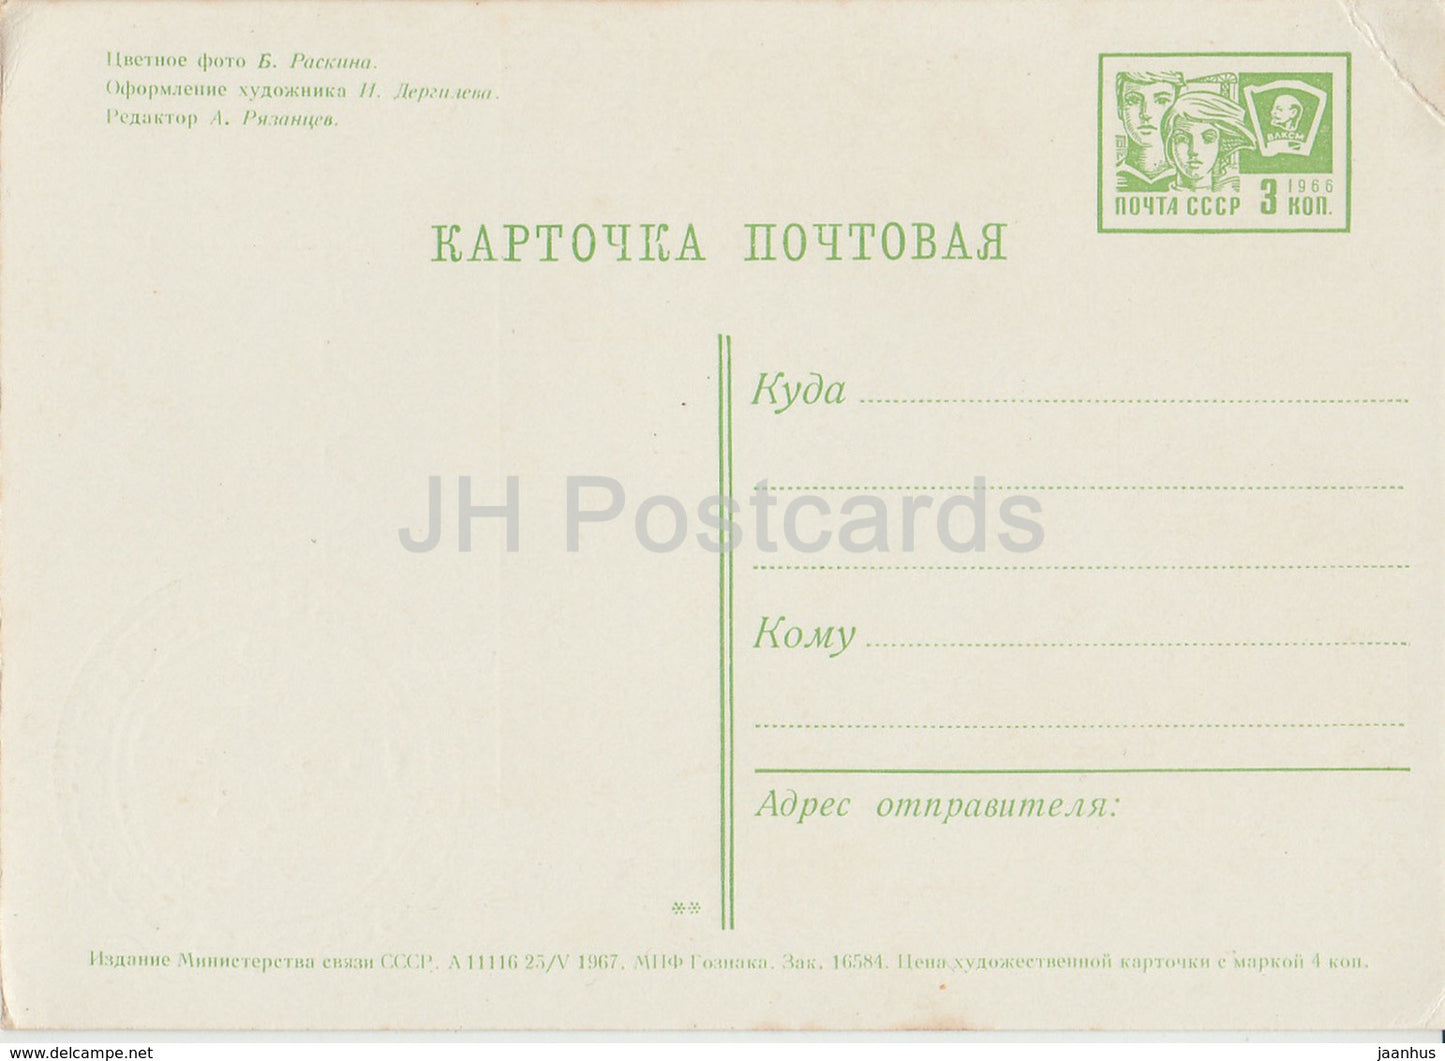 New Year Greeting Card - Winter Forest - Ded Moroz - postal stationery - 1967 - Russia USSR - unused